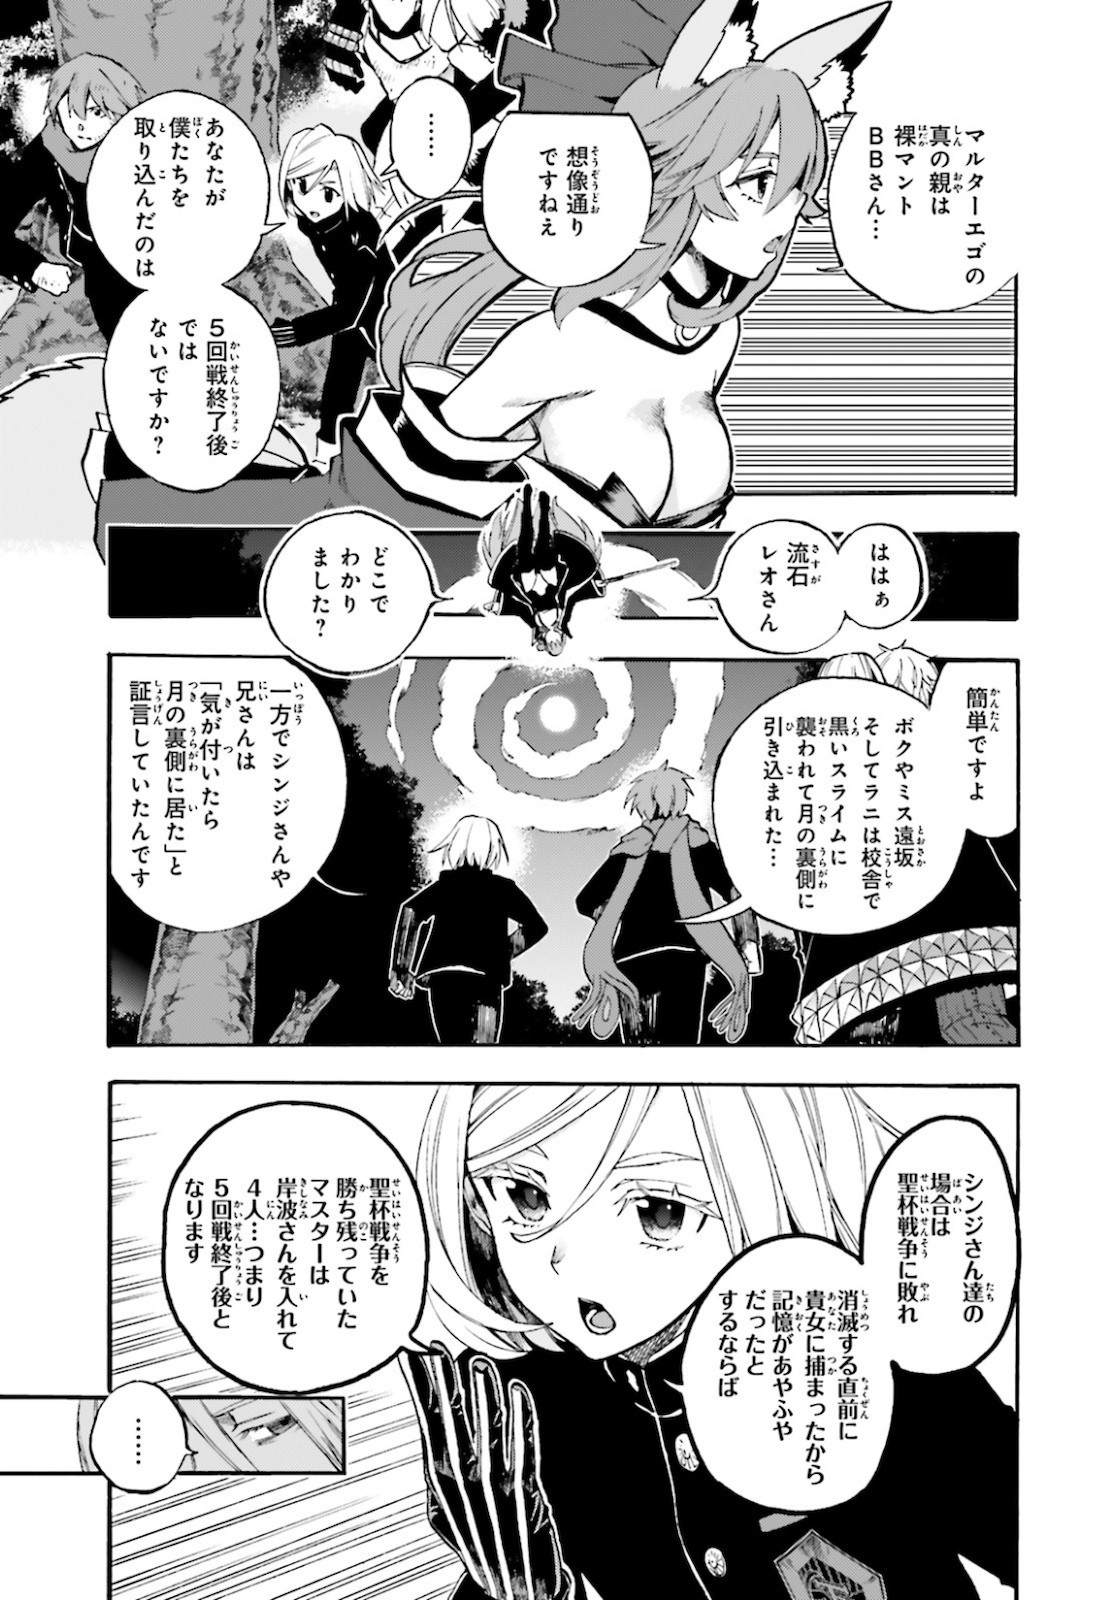 Fate/Extra CCC Fox Tail - Chapter 64.5 - Page 2